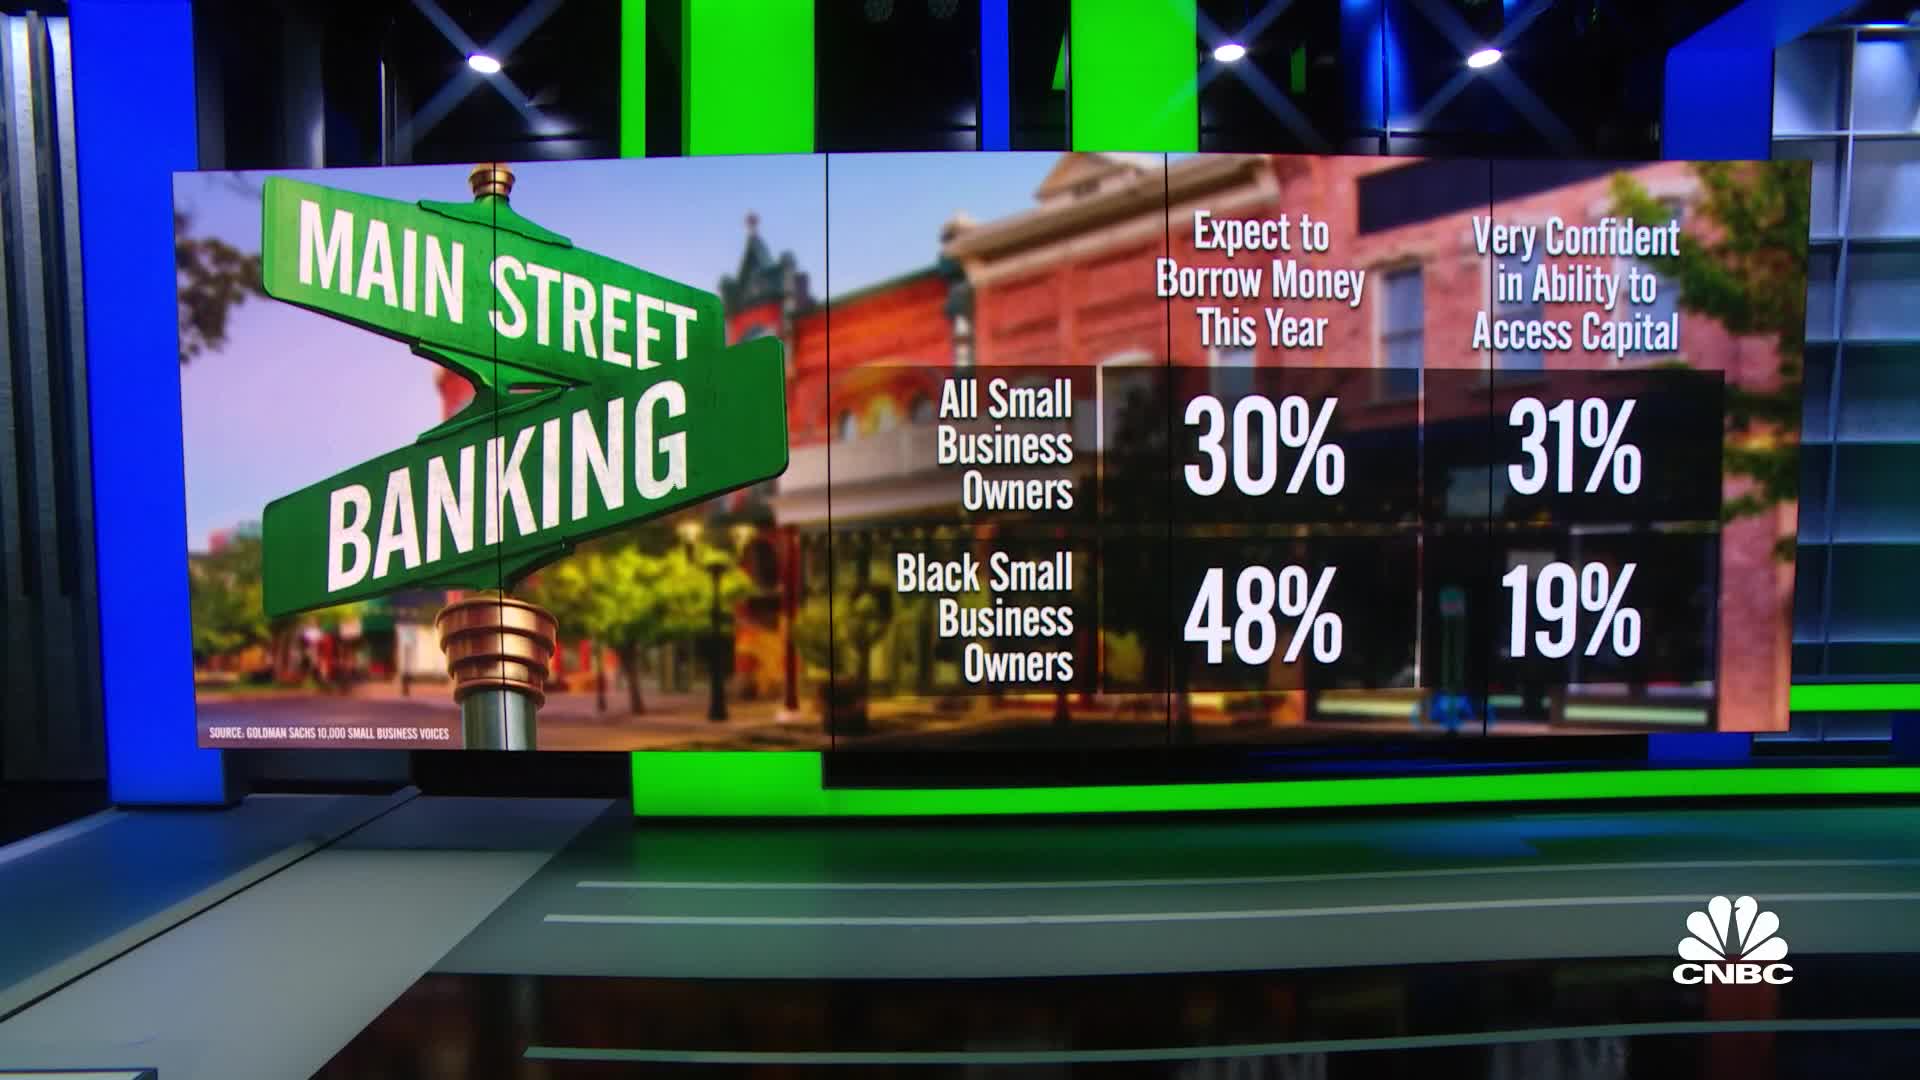 Black small business owners expect to borrow more than average, but are less confident in capital access